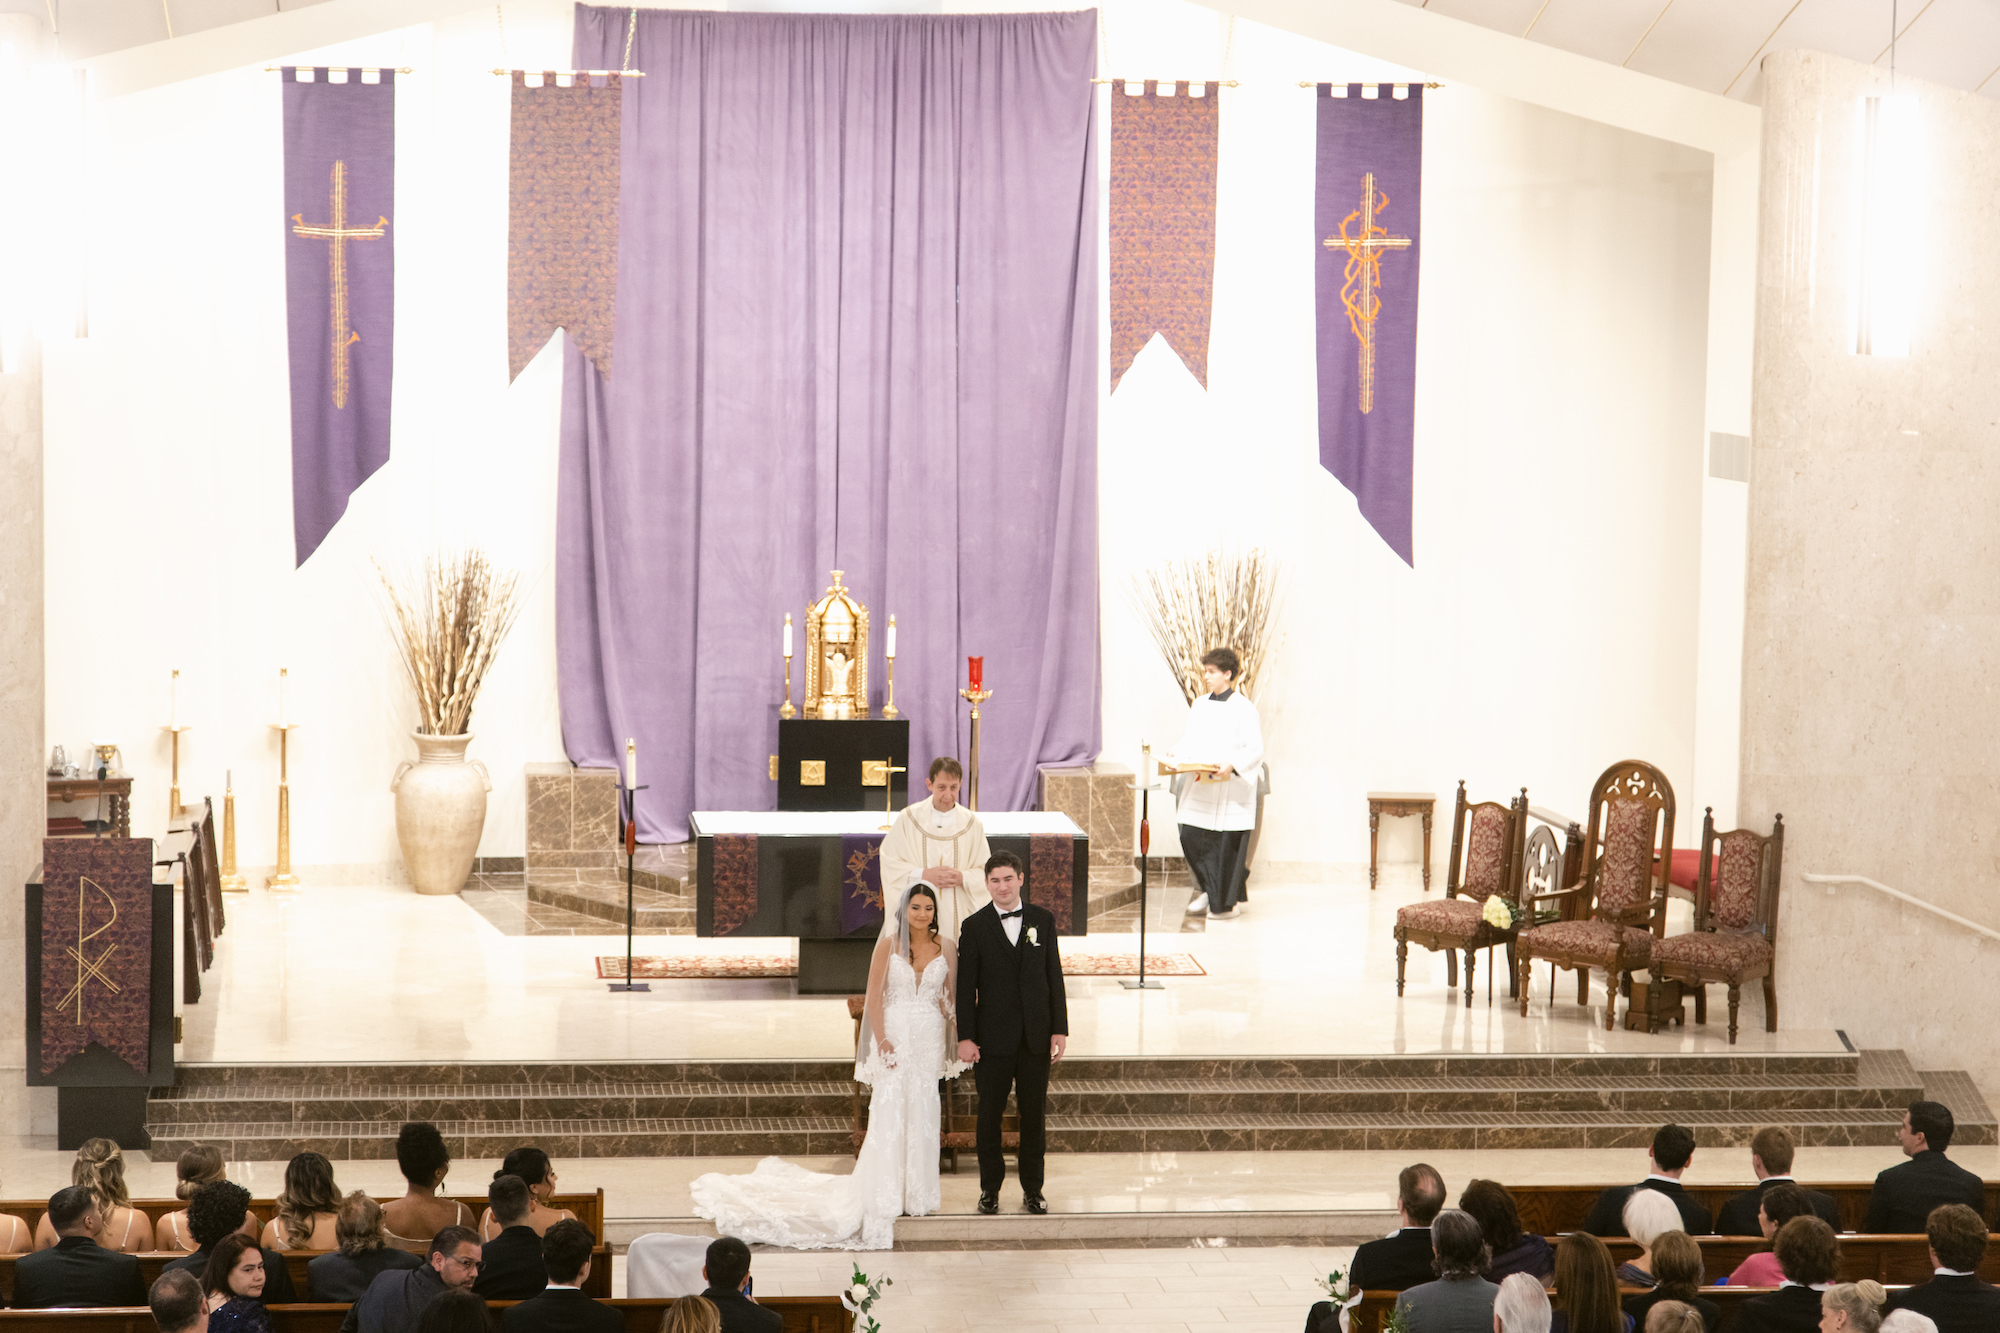 Bride and Groom Traditional Wedding Ceremony at Christ the King Catholic Church in South Tampa | Tampa Bay Wedding Planner EventFull Weddings